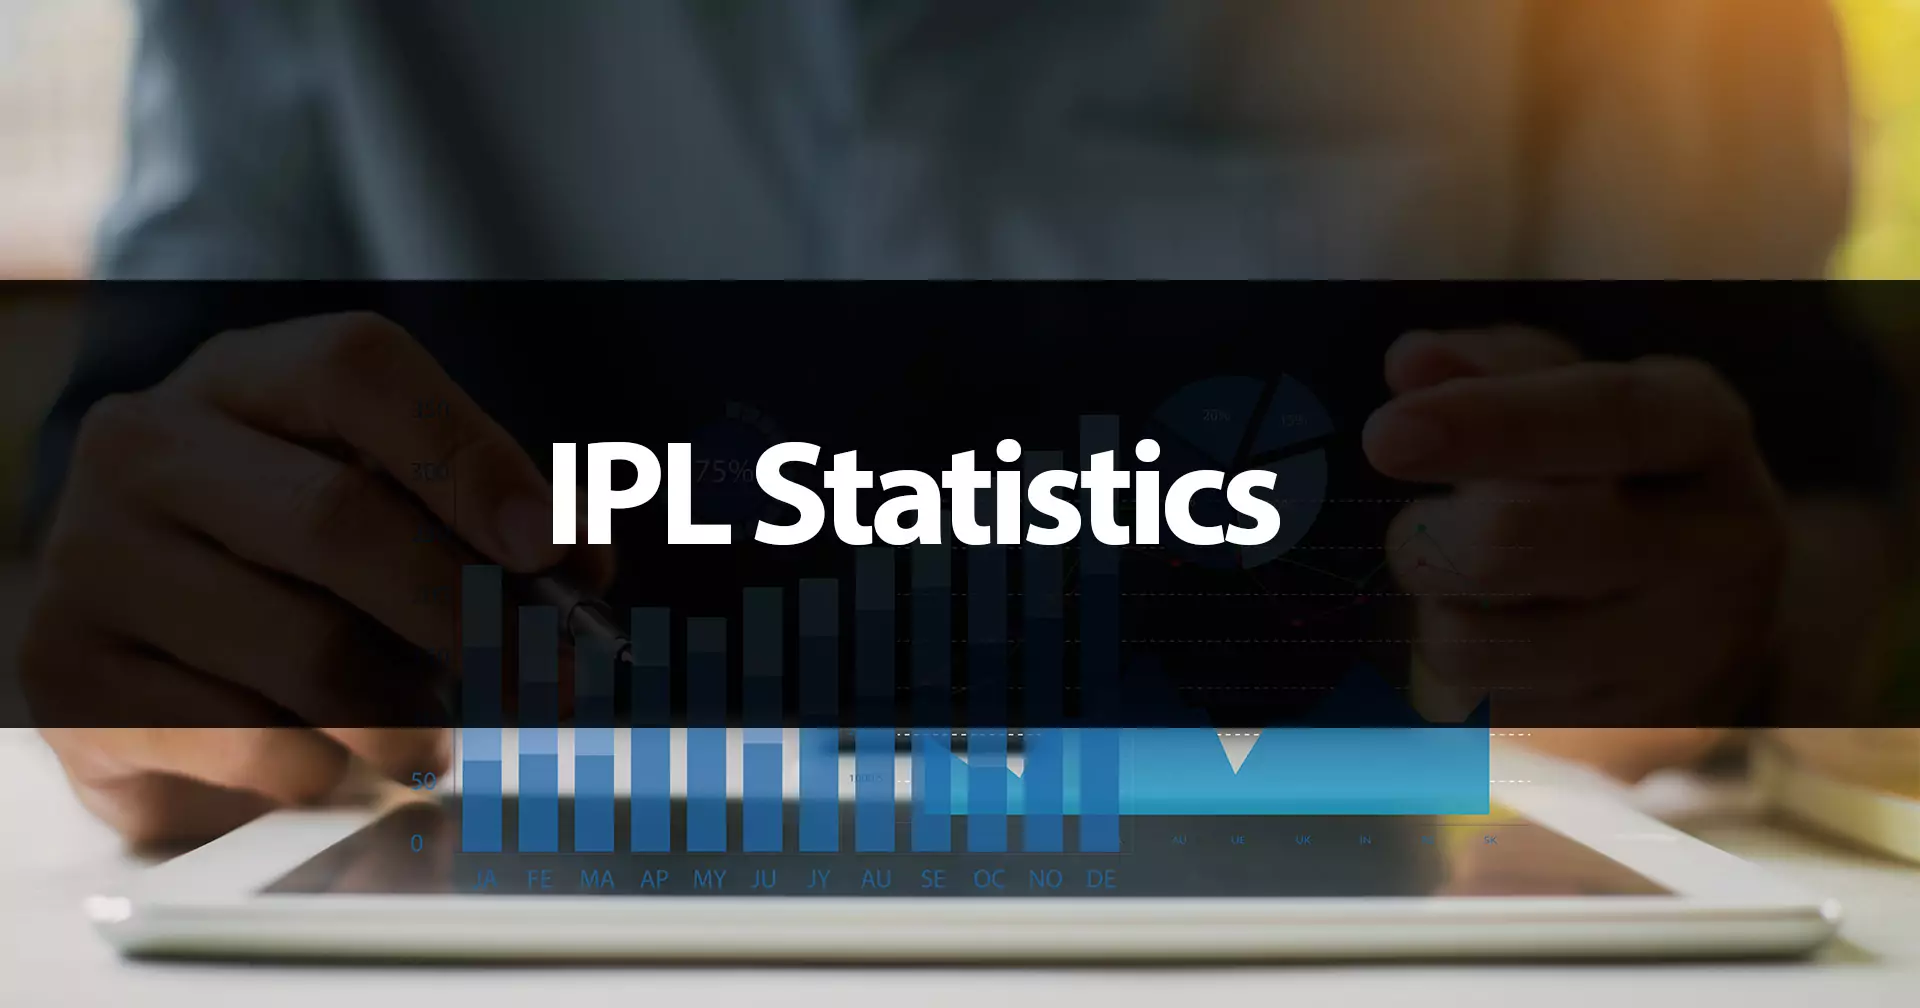 Study statistics during IPL mathces to place even more profitable bets on cricket.